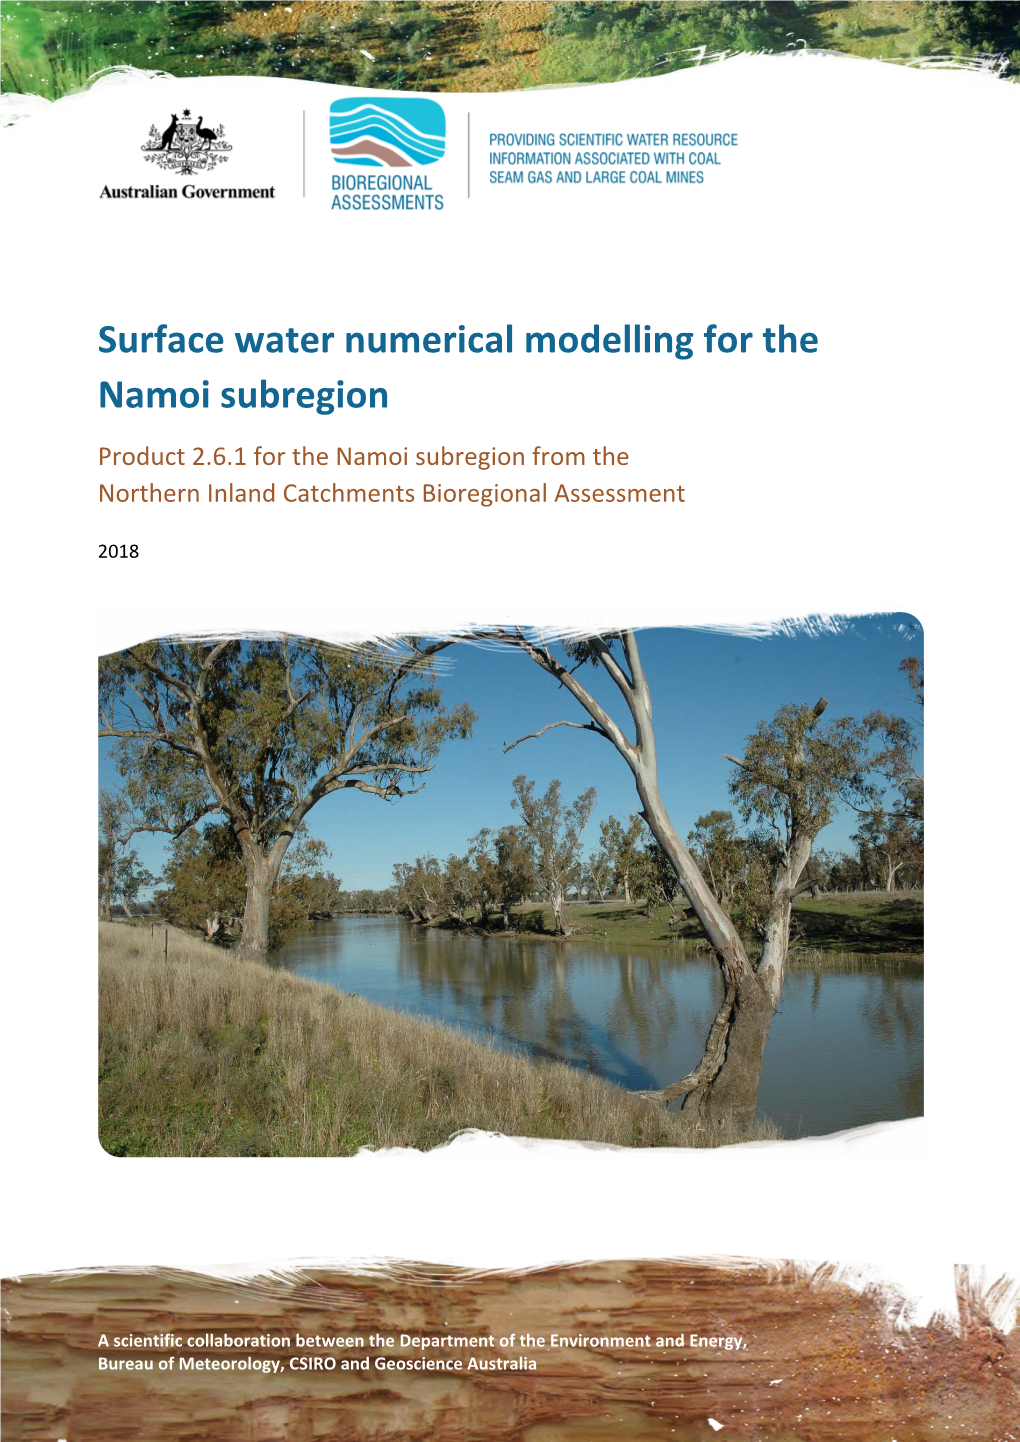 Surface Water Numerical Modelling for the Namoi Subregion Product 2.6.1 for the Namoi Subregion from the Northern Inland Catchments Bioregional Assessment